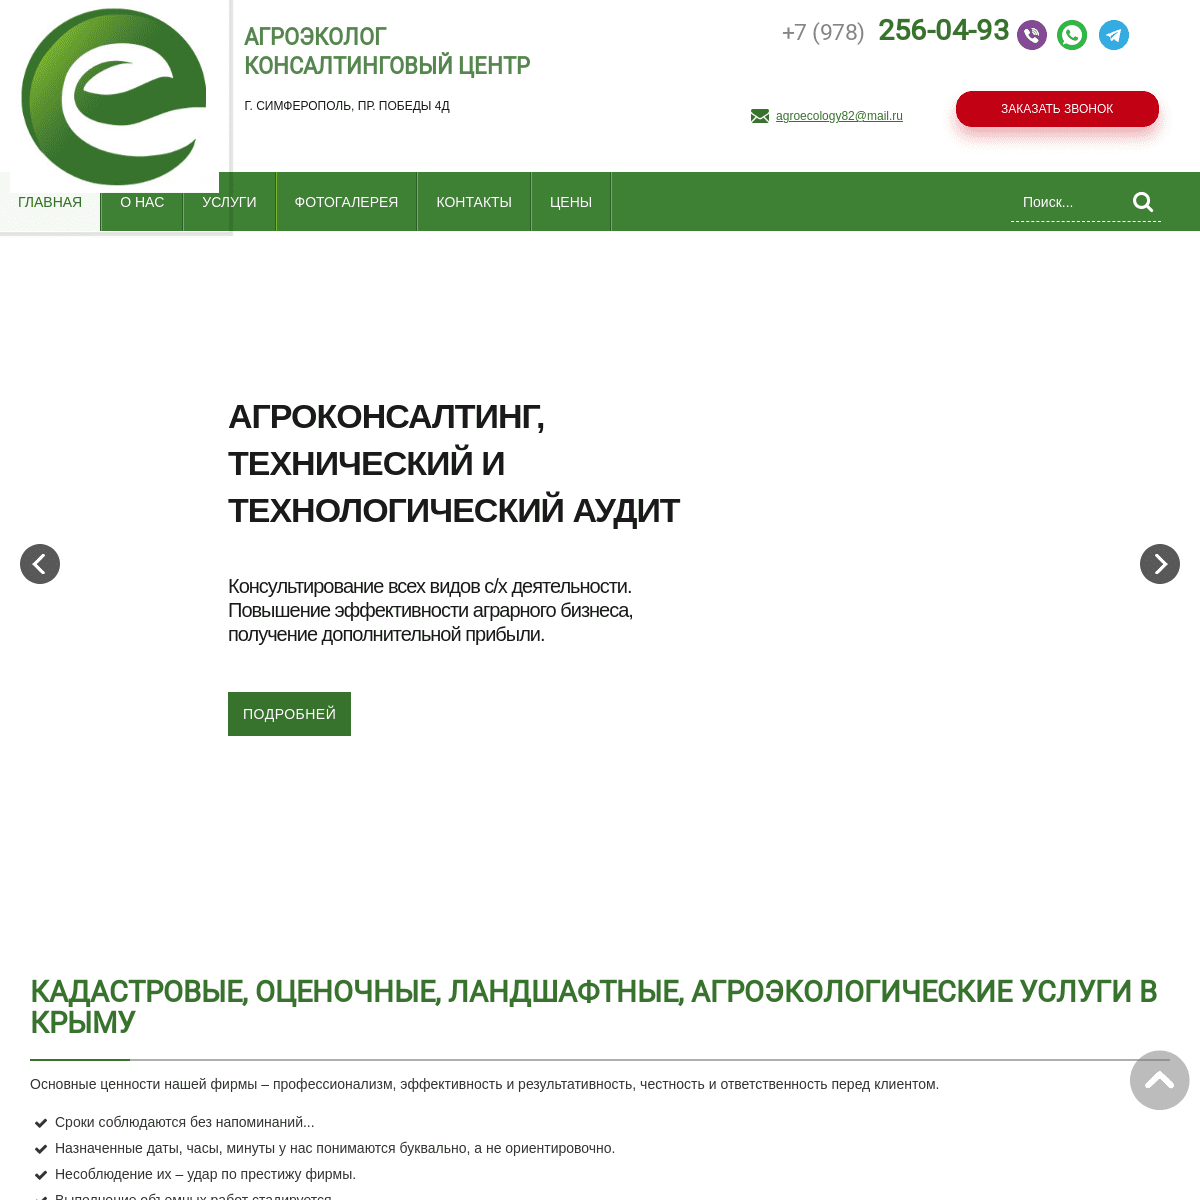 A complete backup of https://agroecology82.ru